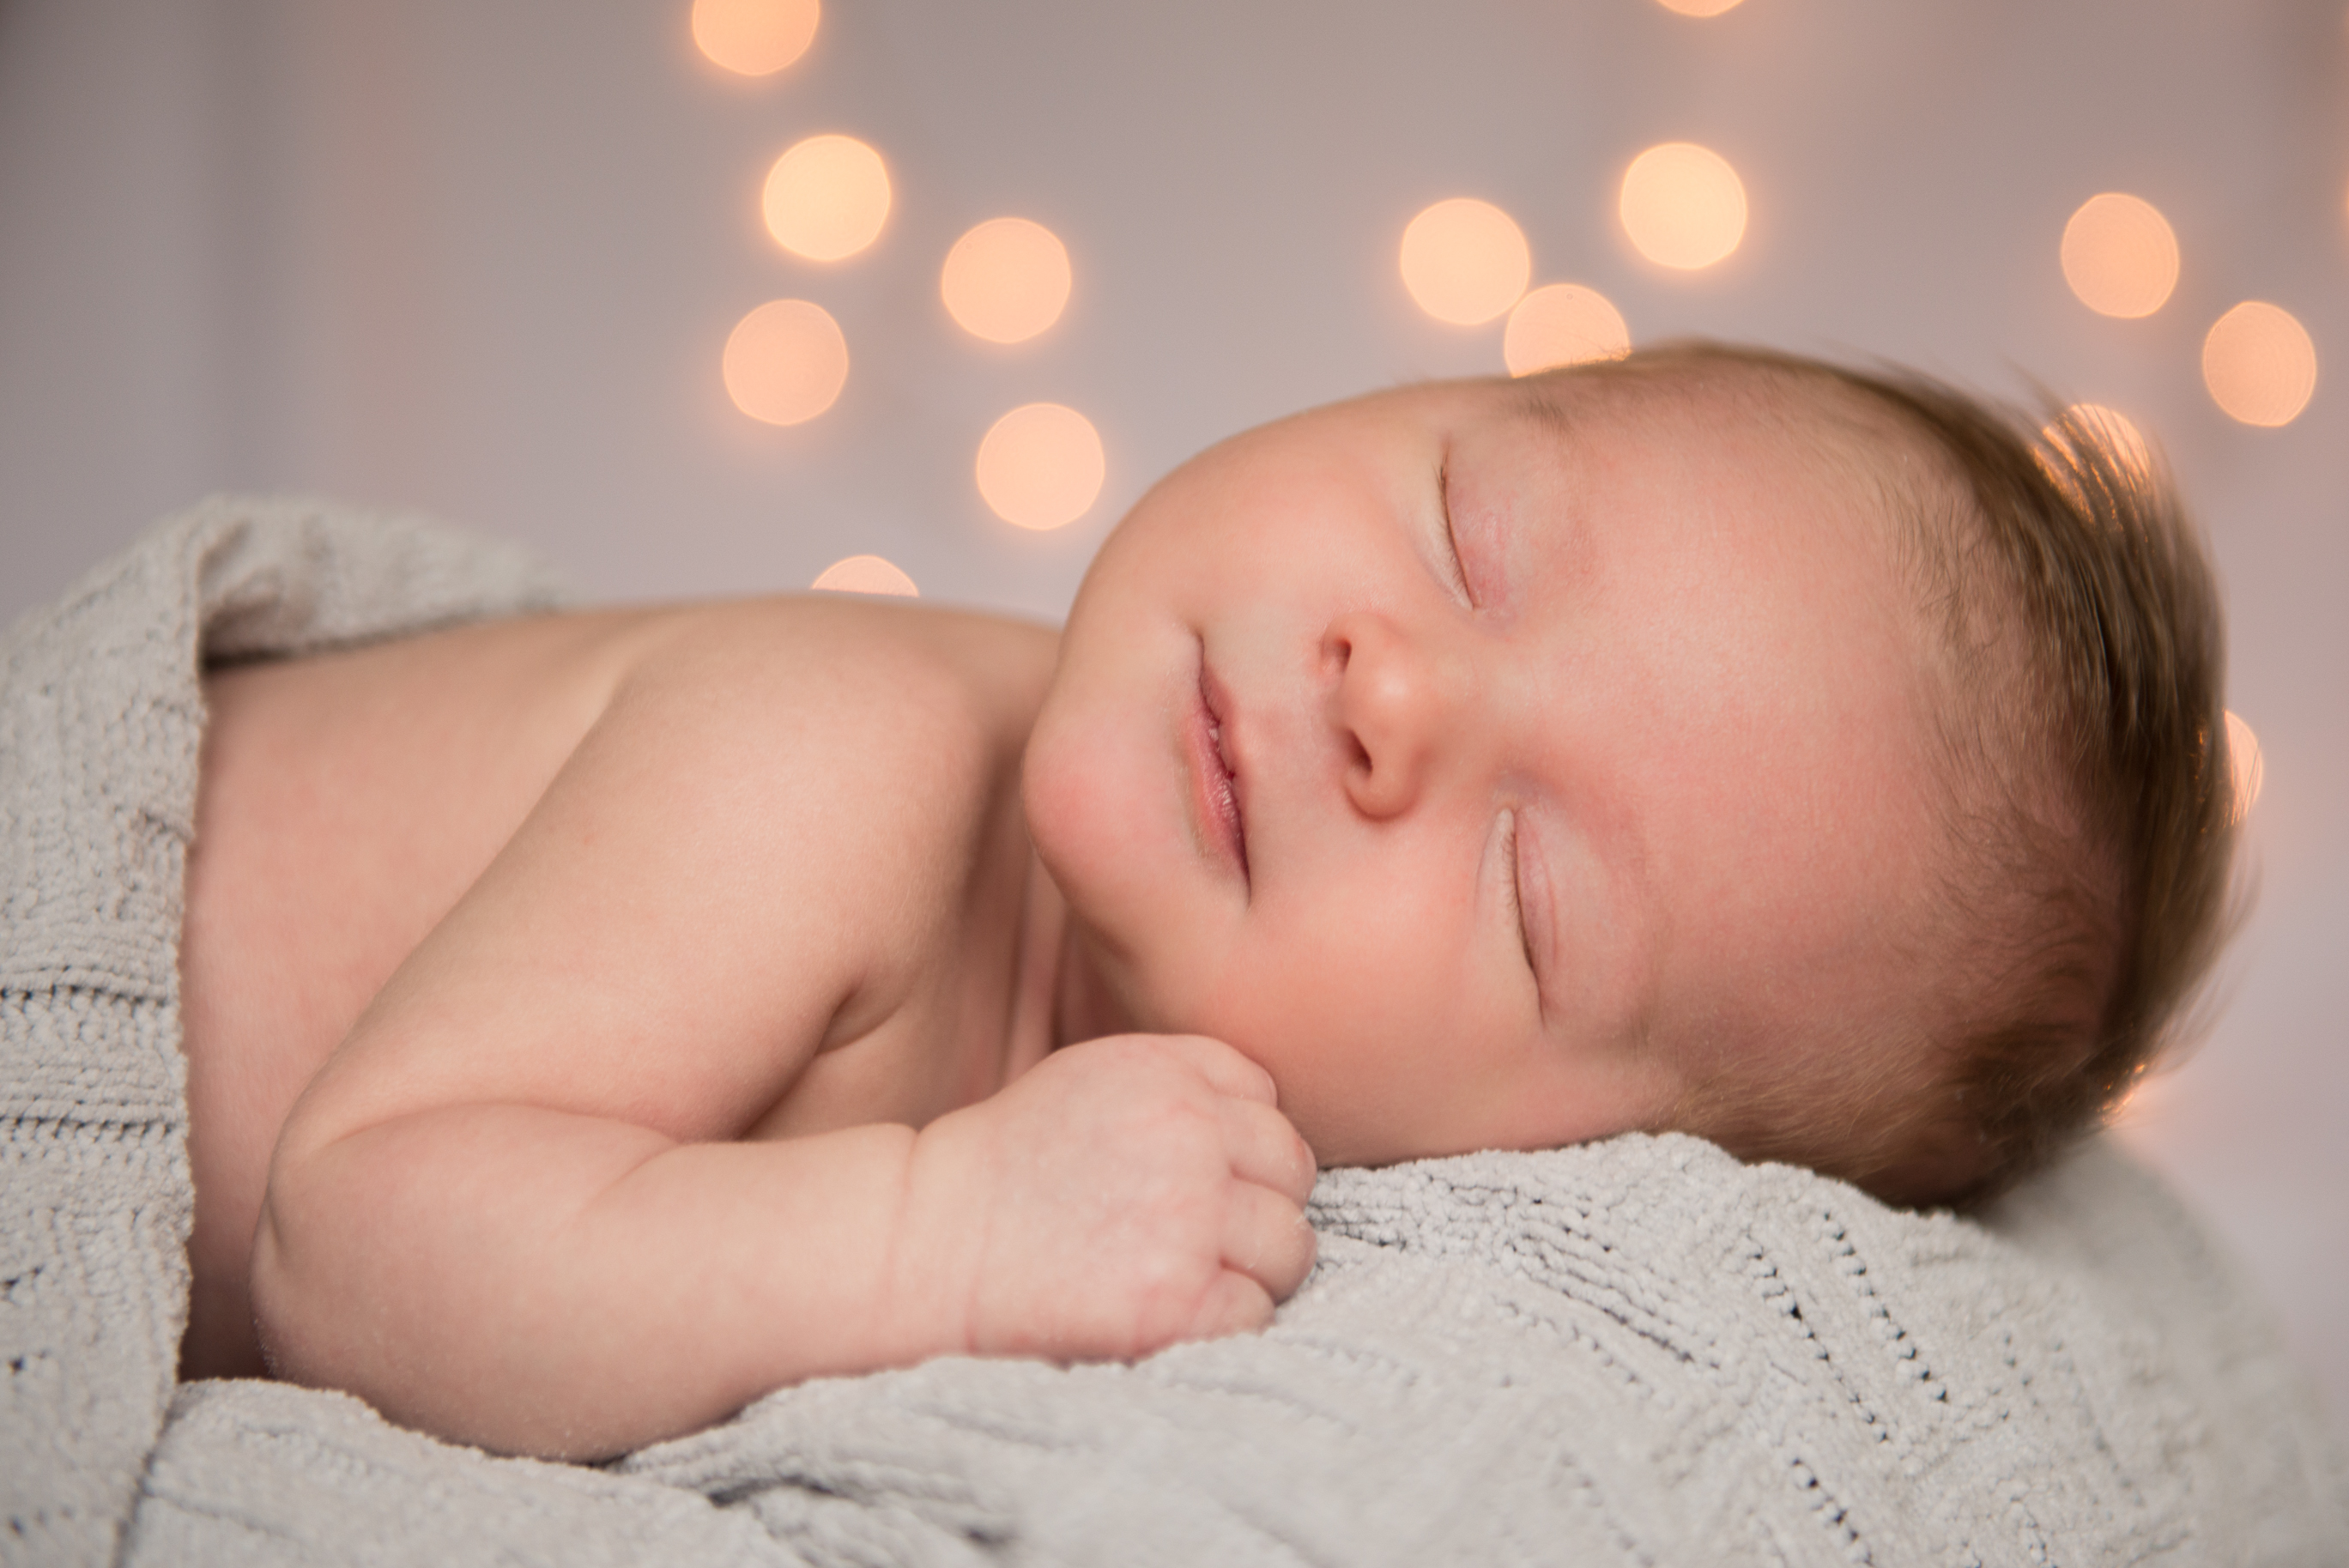 4 Reasons Why “You Should Never Wake A Sleeping Baby” is A Myth! - A ...